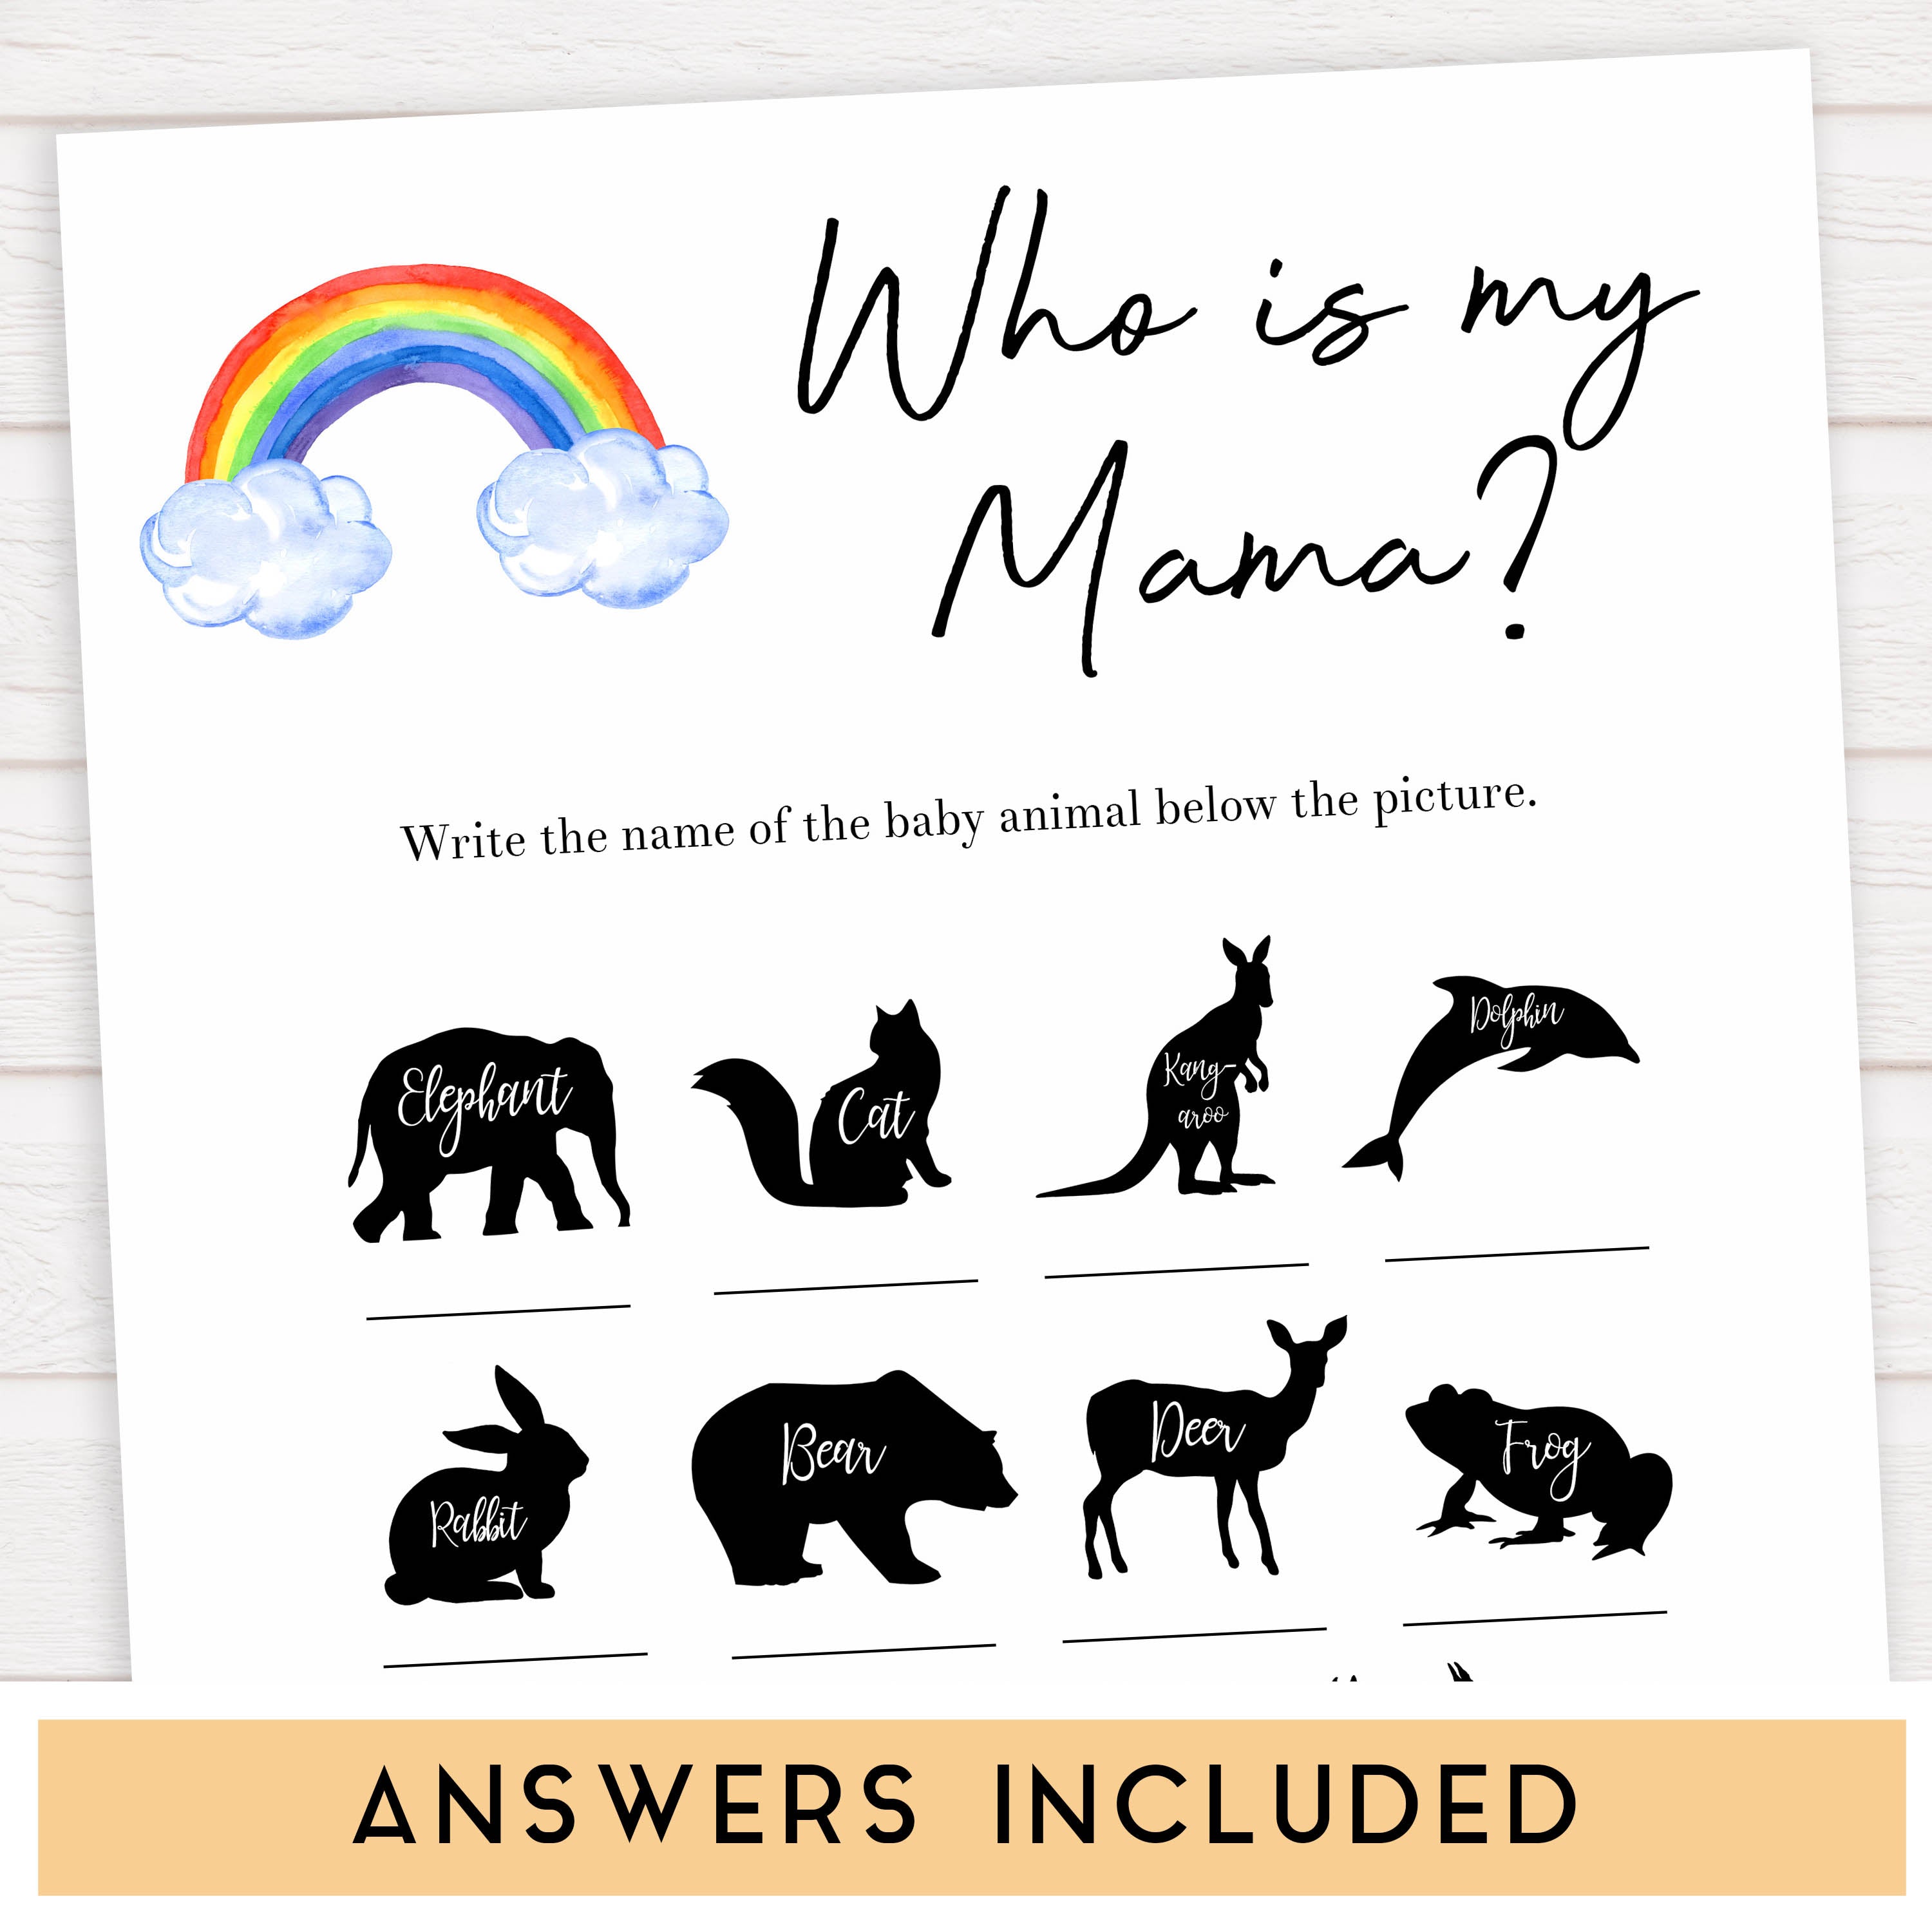 Rainbow baby games, rainbow who is my mama, rainbow printable baby games, instant download games, rainbow baby shower, printable baby games, fun baby games, popular baby games, top 10 baby games